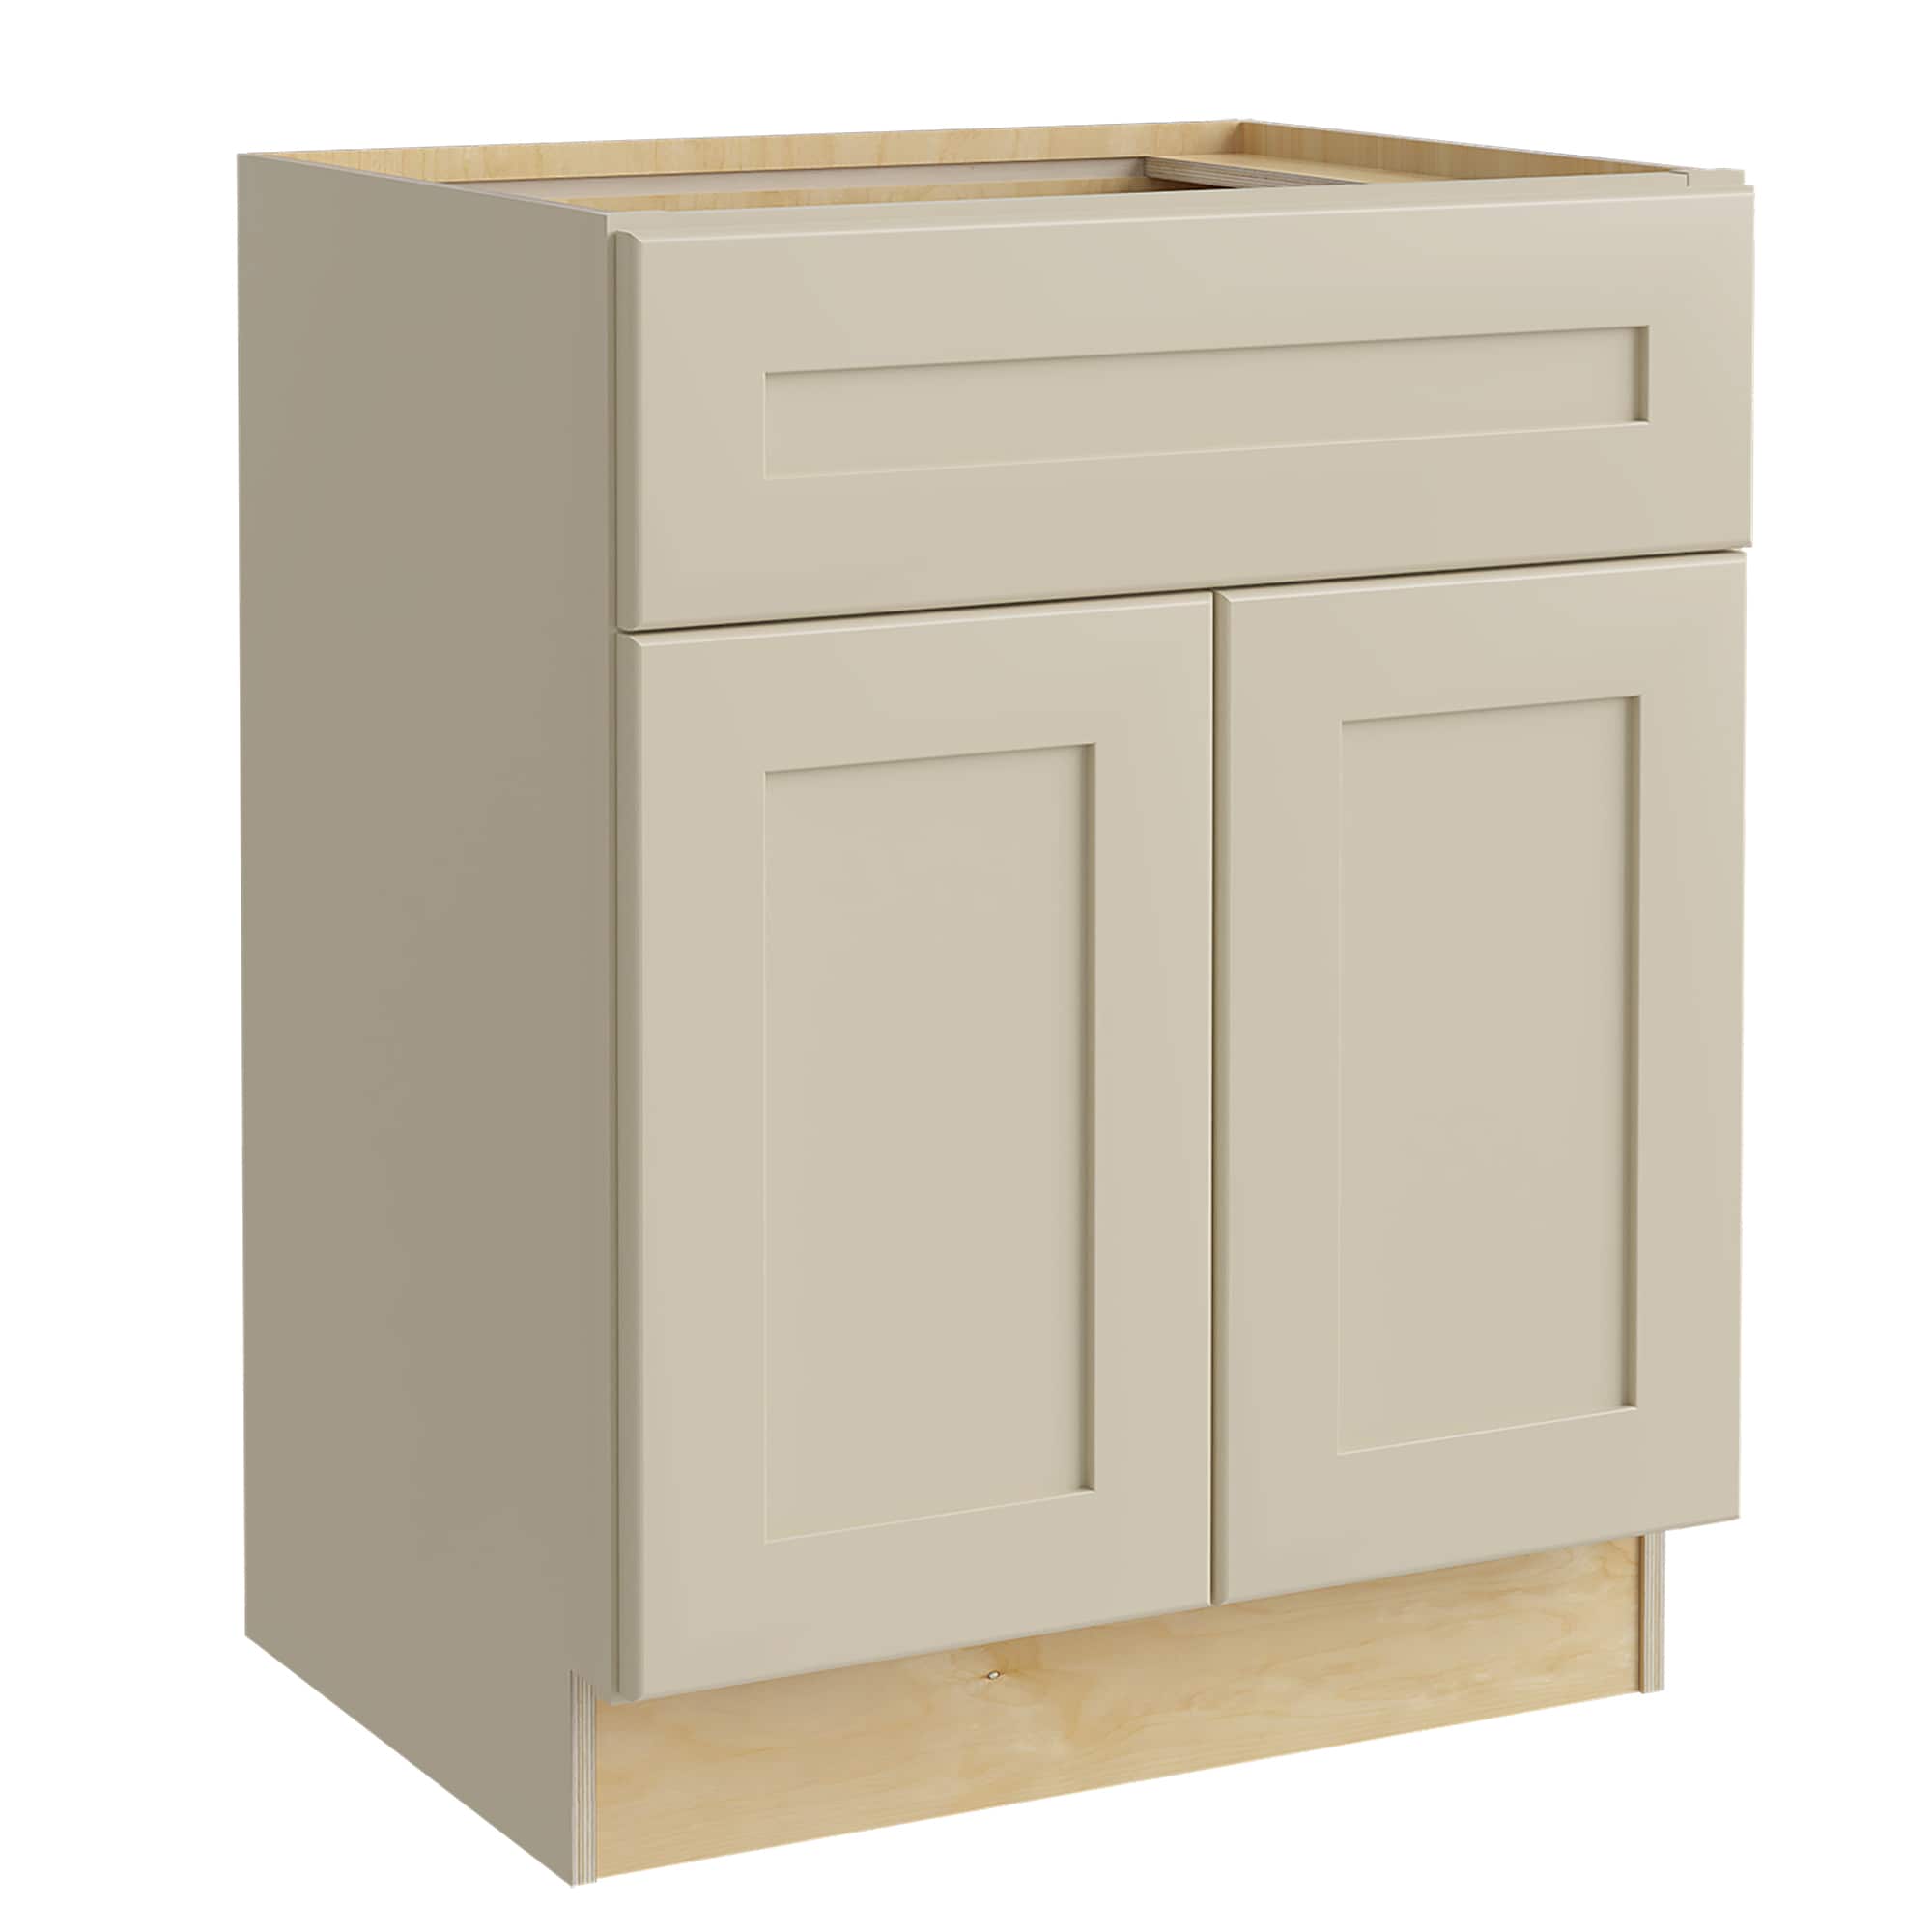 Luxxe Cabinetry 24-in W x 34.5-in H x 24-in D Norfolk Blended Cream Painted Sink Base Fully Assembled Semi-custom Cabinet in Off-White | SB24-NBC